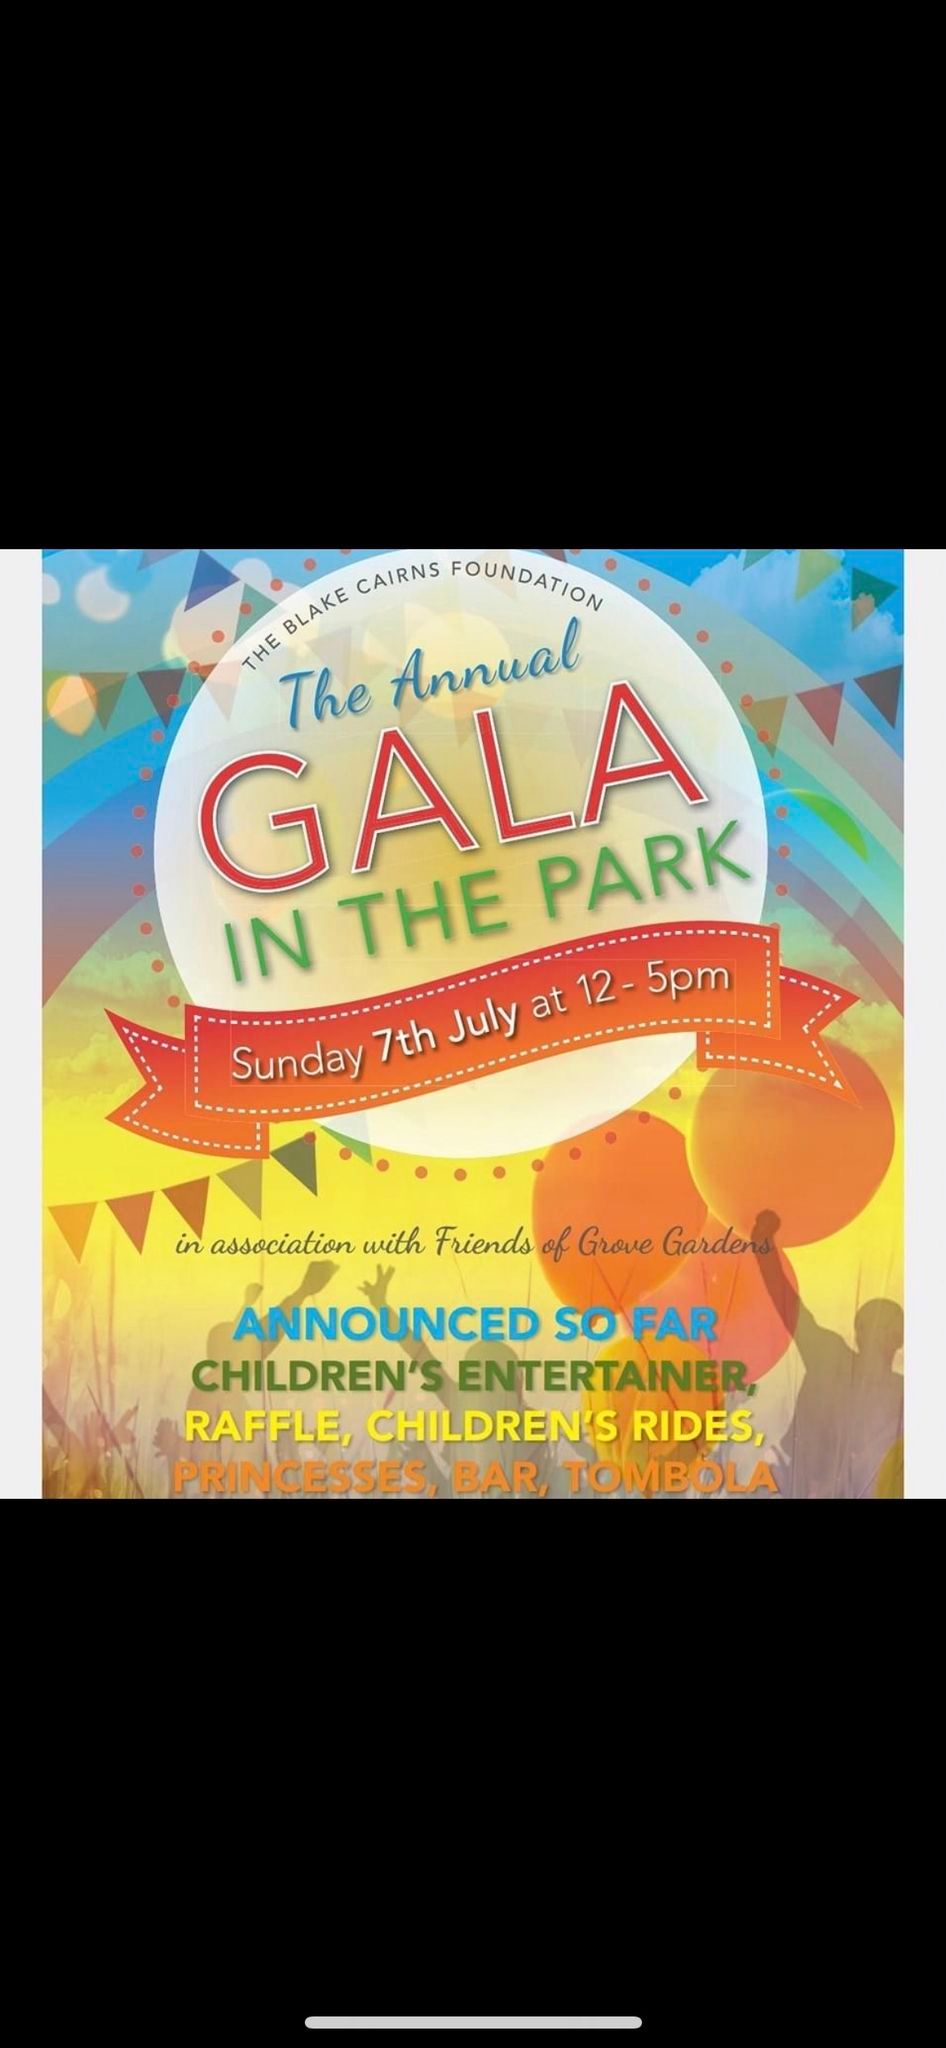 Gala in the Park 